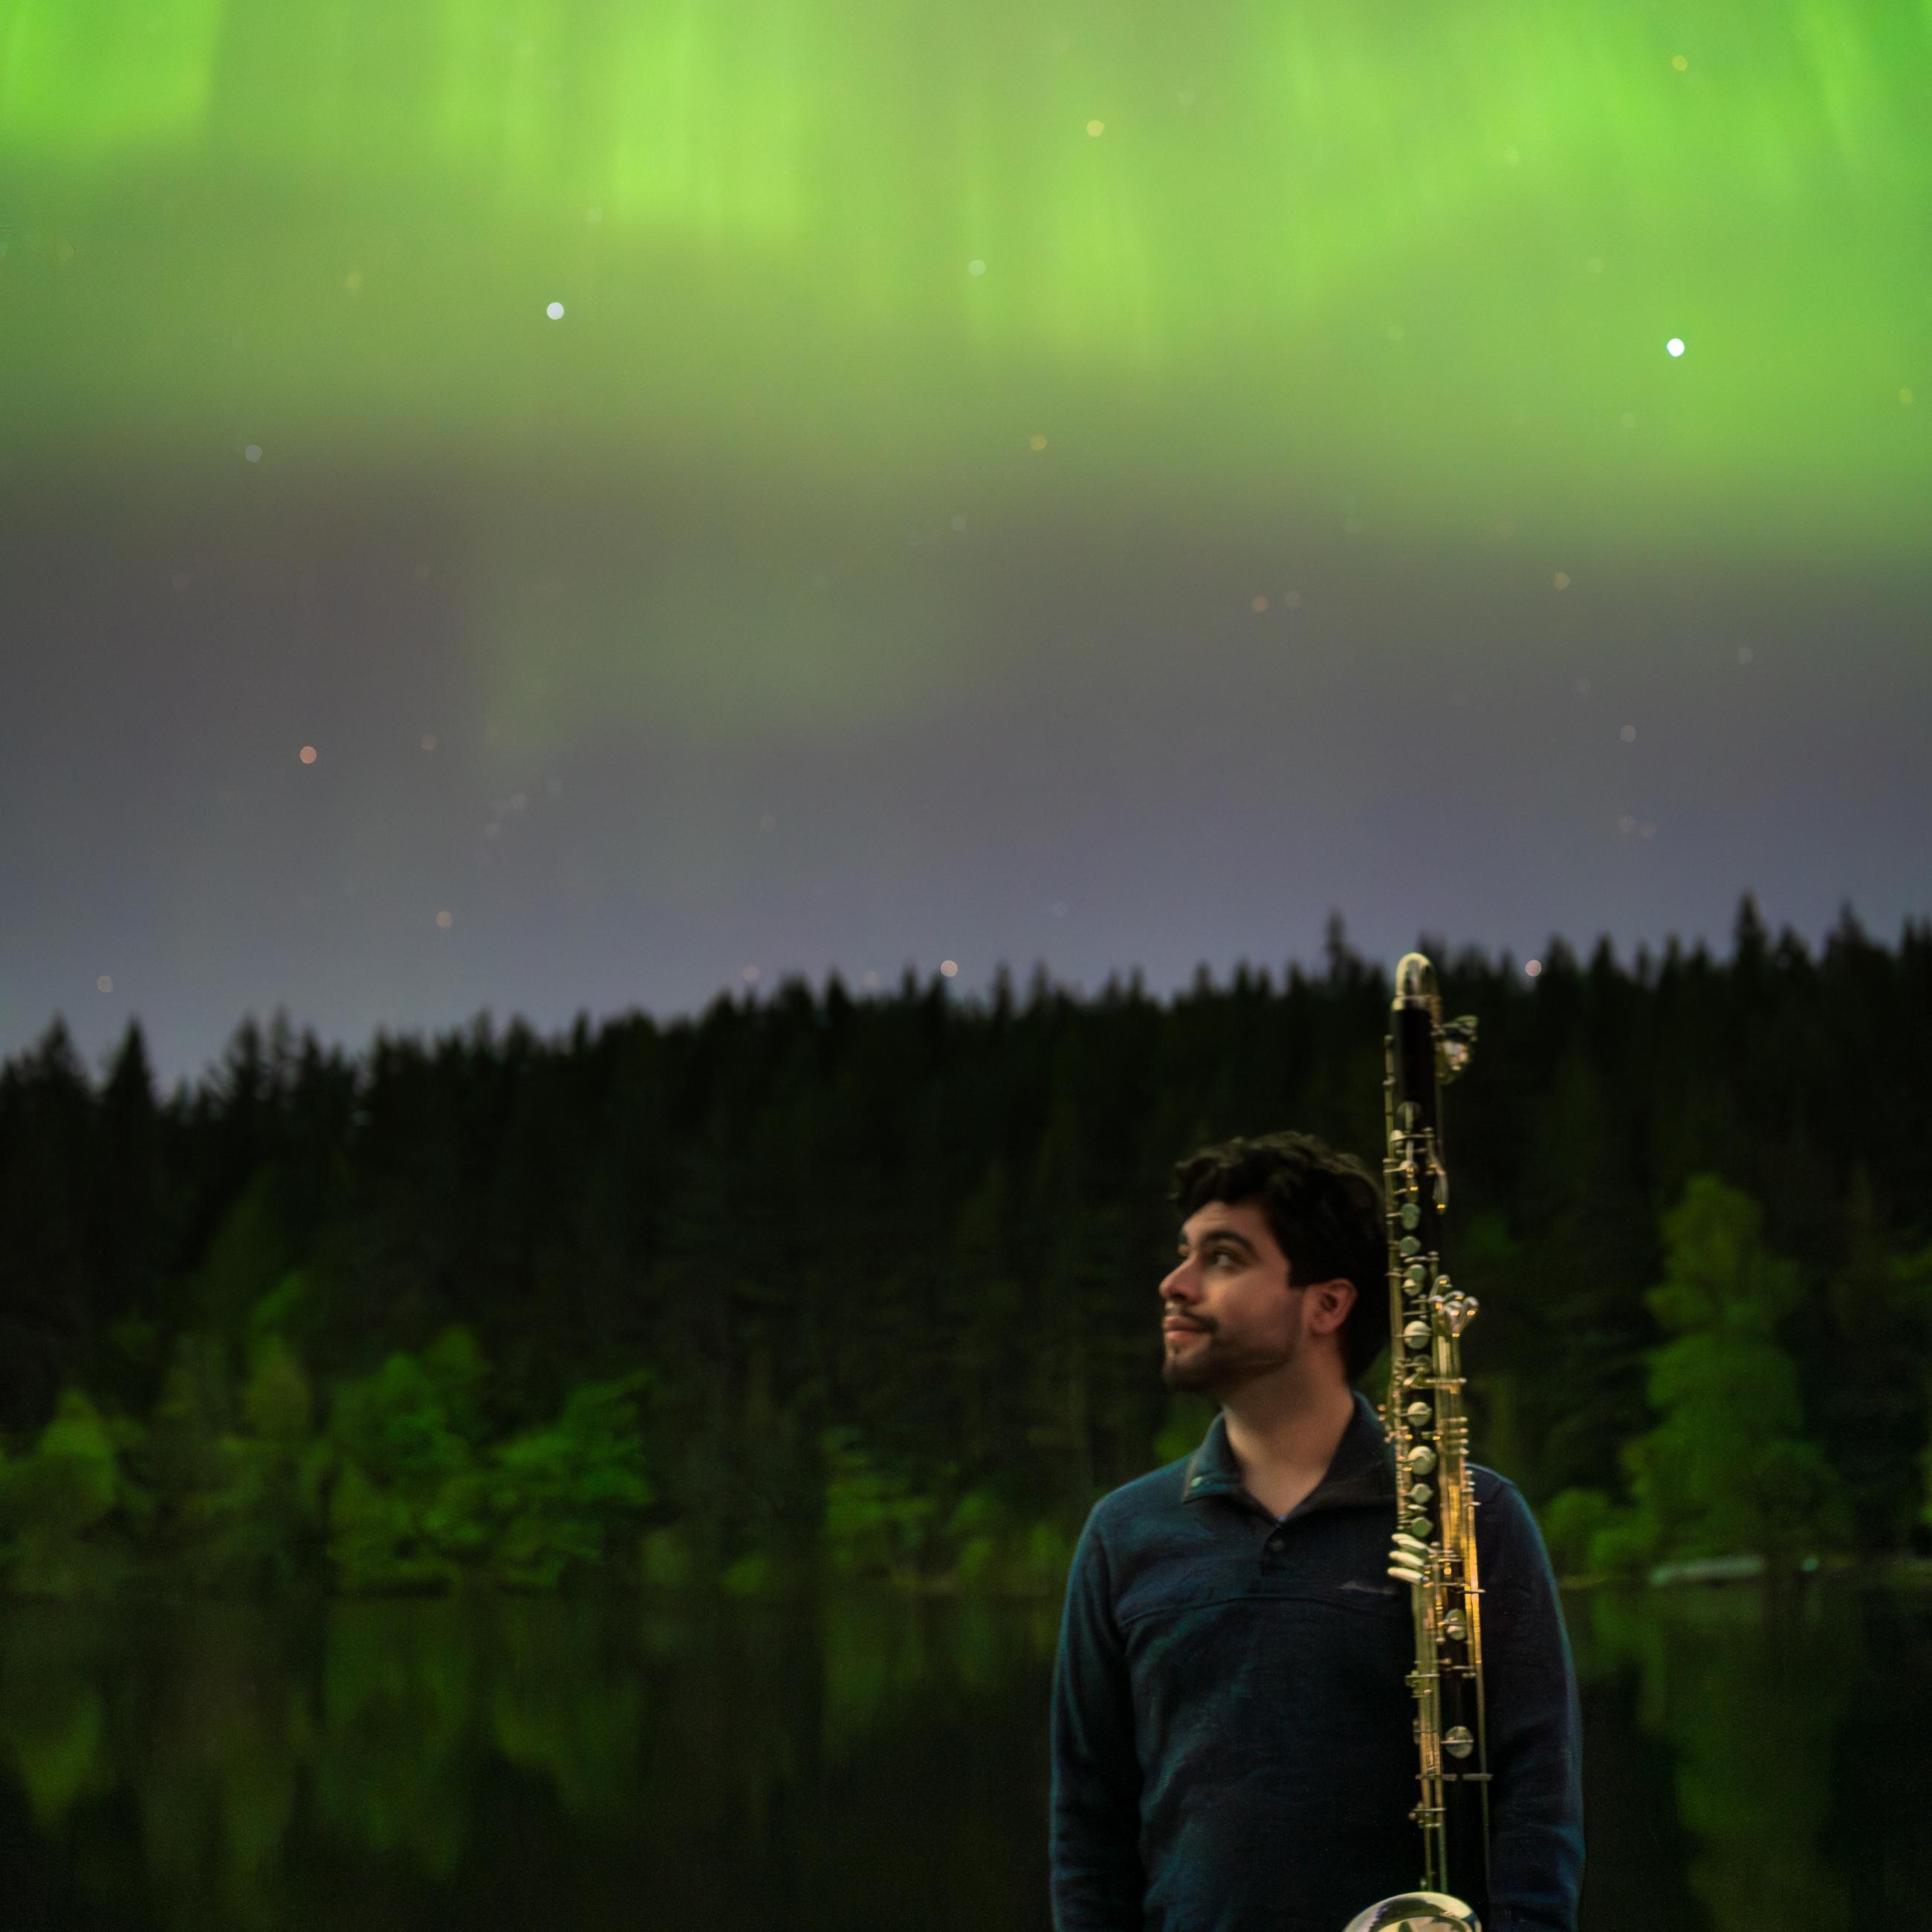 David Bissell standing holding a clarinet, smiling up at a sky filled with aurora borealis